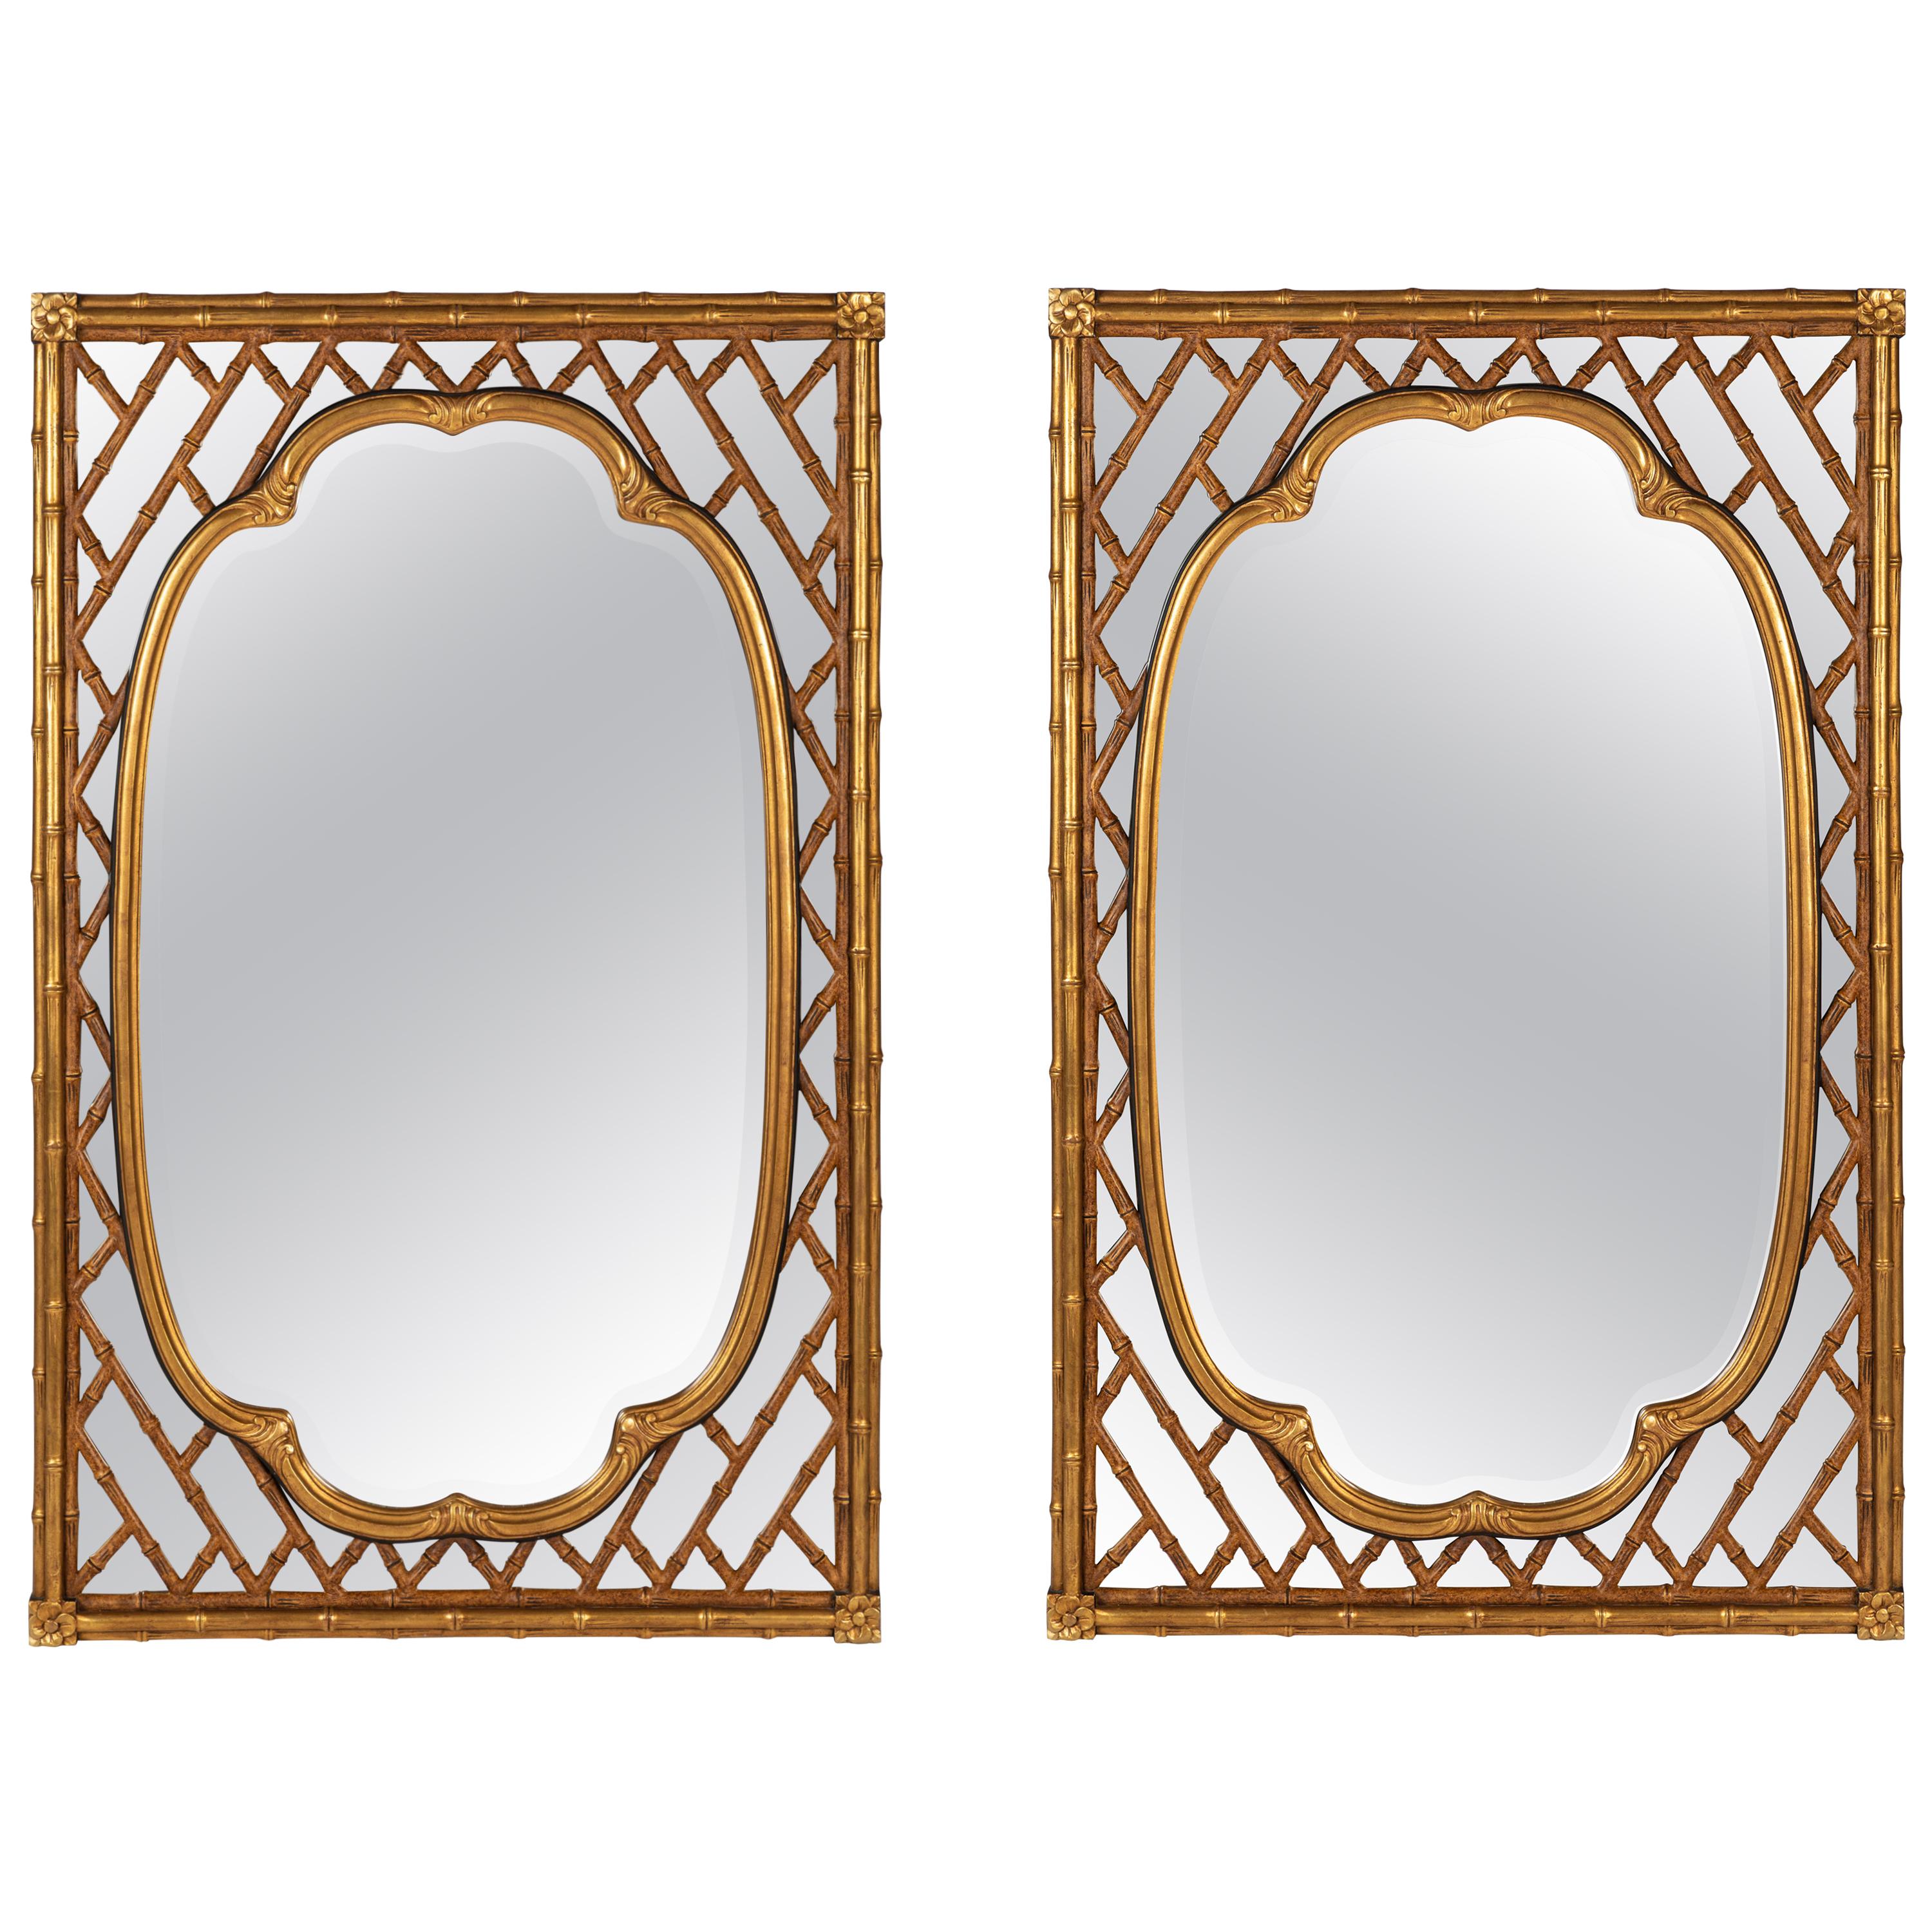 Pair of French Trellis and Bamboo Mirrors by Mirror Fair for Baker Knapp & Tubbs